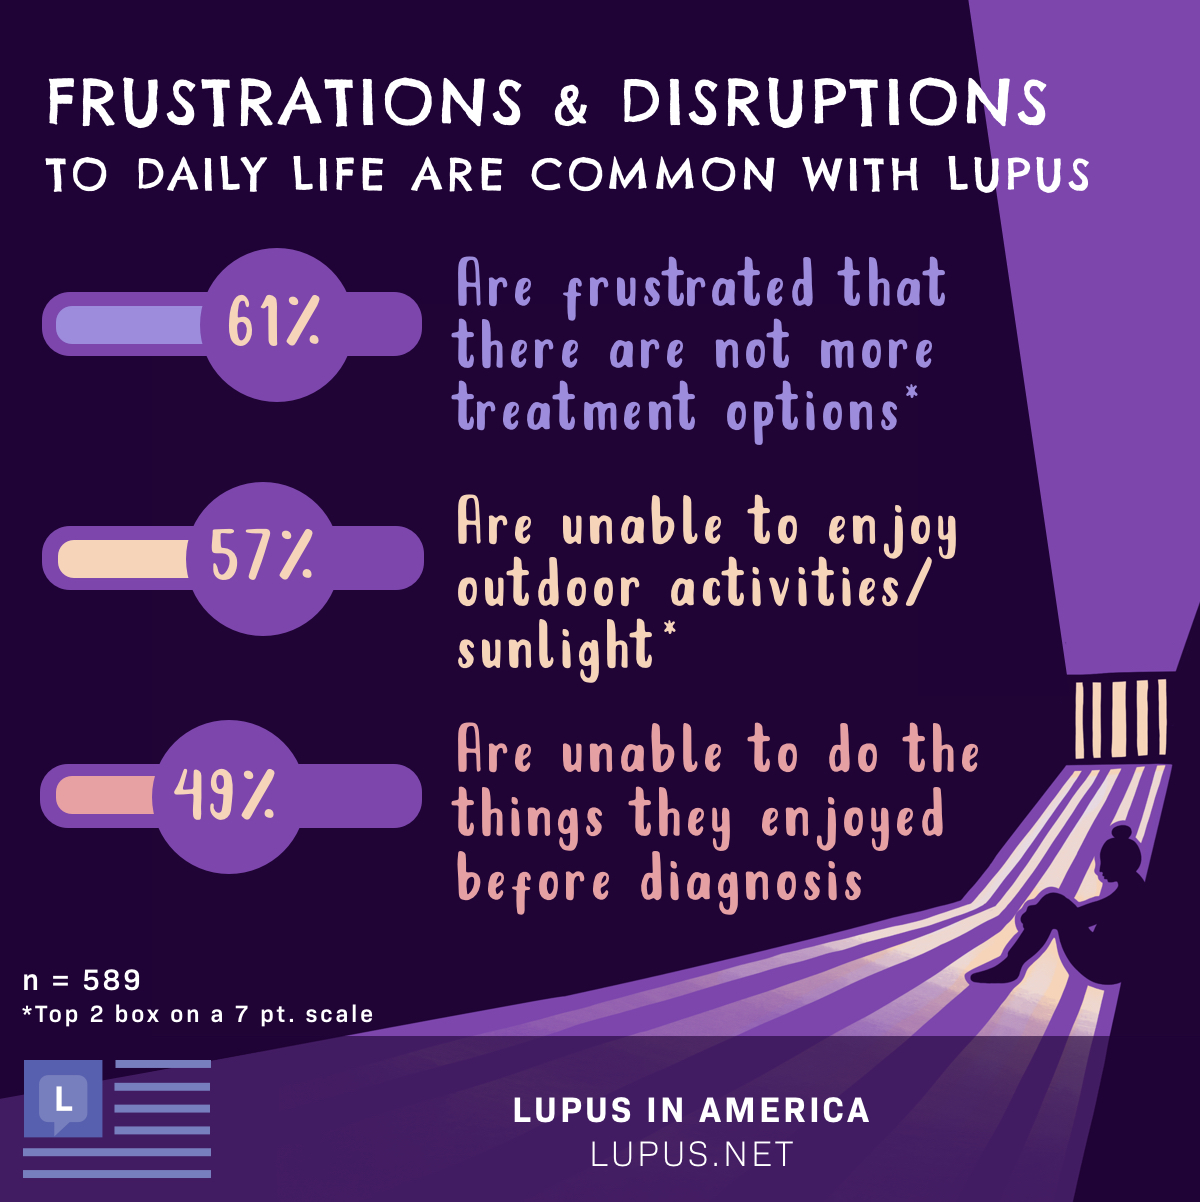 The frustrations and disruptions associated with lupus, including stats: 61% are frustrated that there are not more treatment options, 57% are unable to enjoy outdoor activities/sunlight, and 49% are unable to do the things they enjoyed before diagnosis. Imagery includes a female sitting, holding her legs, trapped indoors.